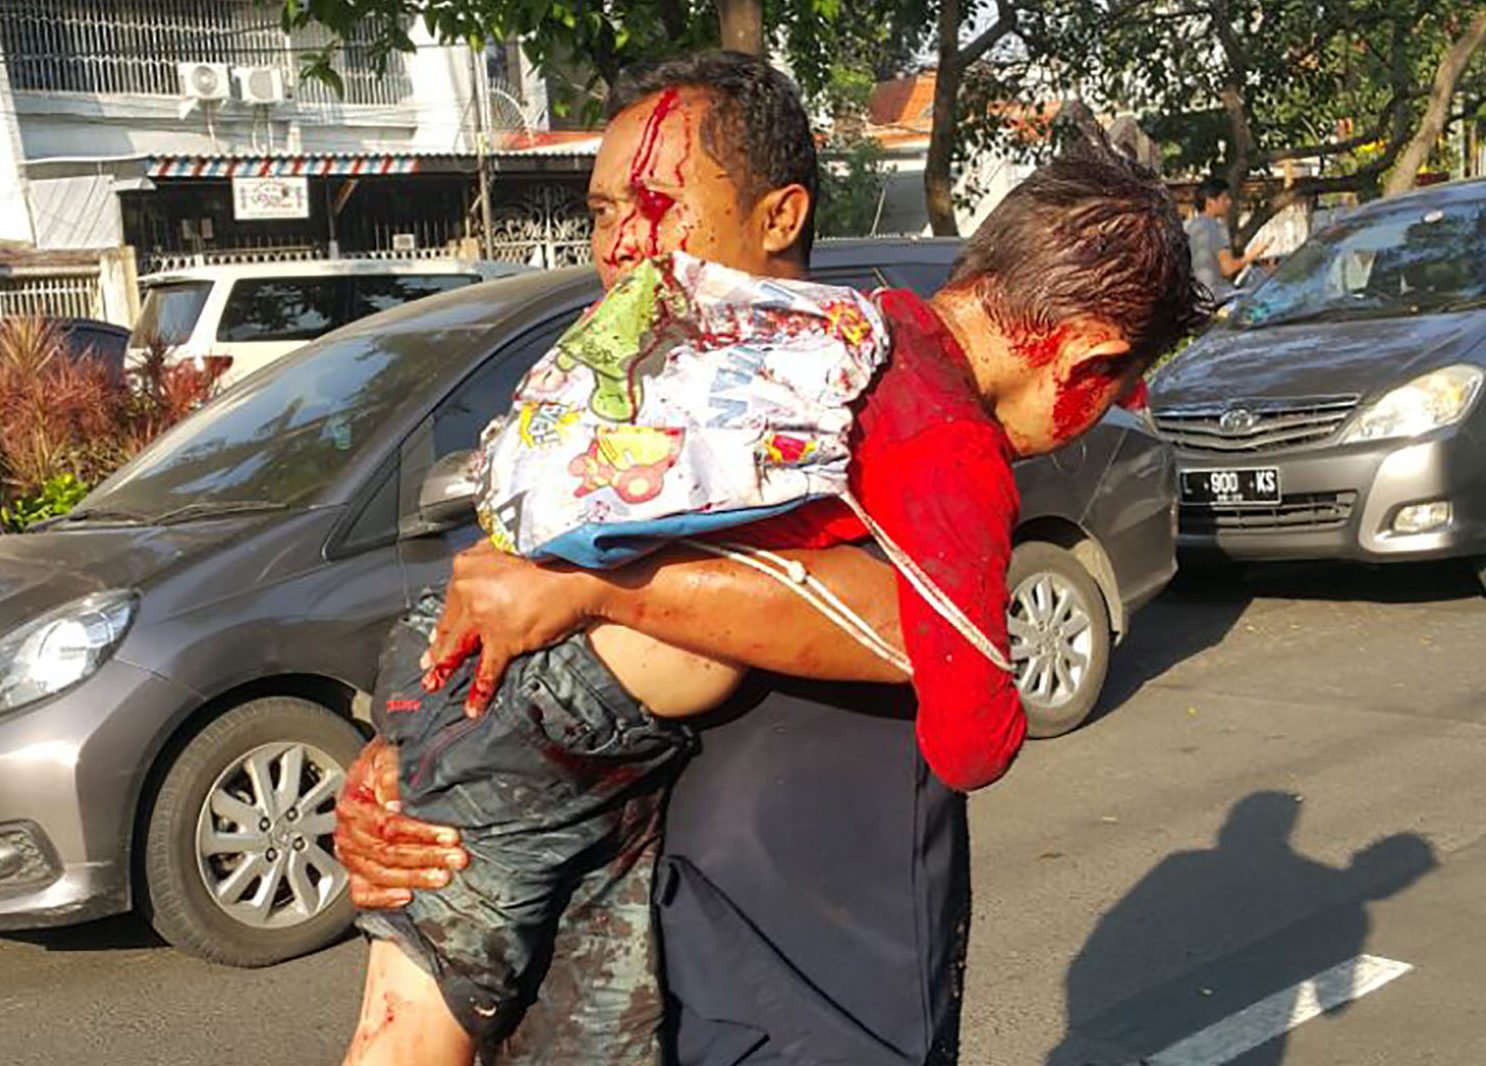 A man carries an injured child away from the scene of a suicide bombing at a church in Surabaya, Indonesia on May 13, 2018. PHOTO: TheDCNF